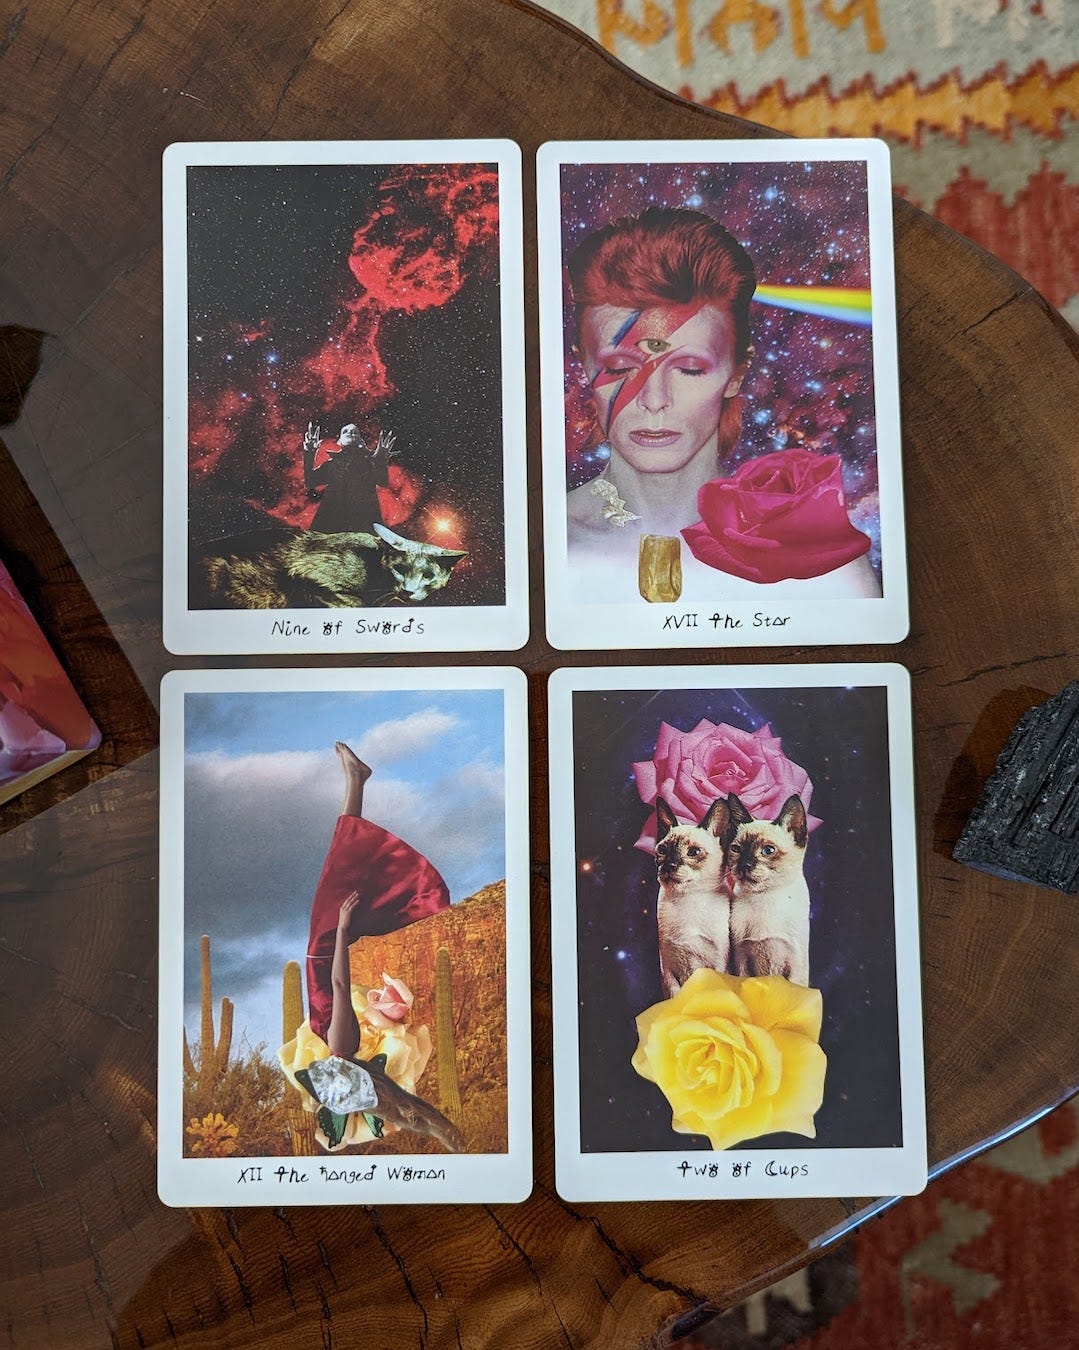 Four tarot cards from The Lioness Oracle tarot deck are spread out on a table: The Nine of Swords, The Star, The Hanged Woman, and the Two of Cups. The cards feature various collage artwork.